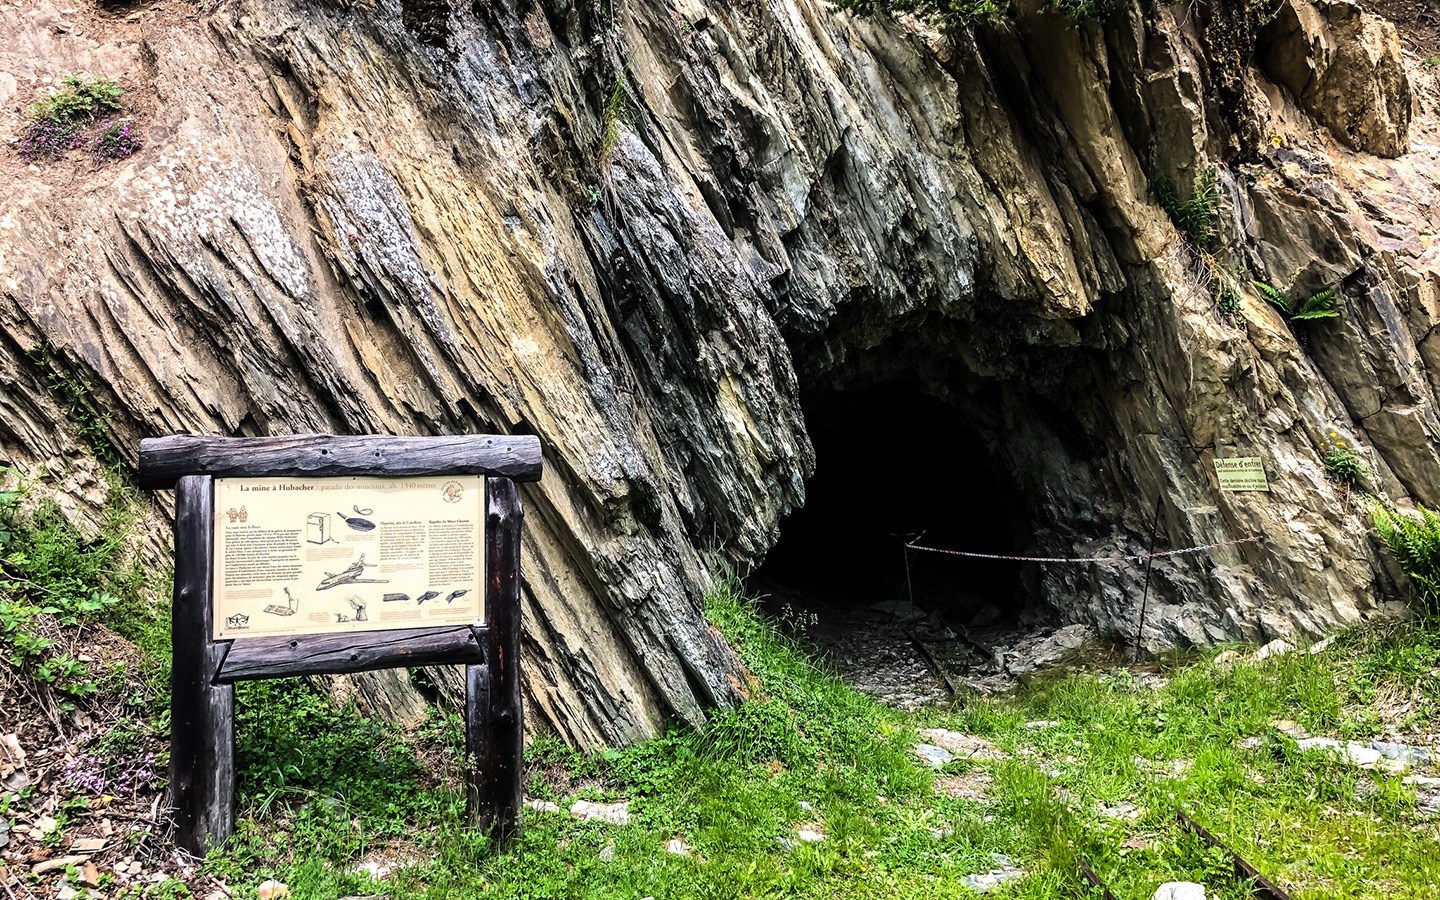 Entrance to a mine near the Col des Planches